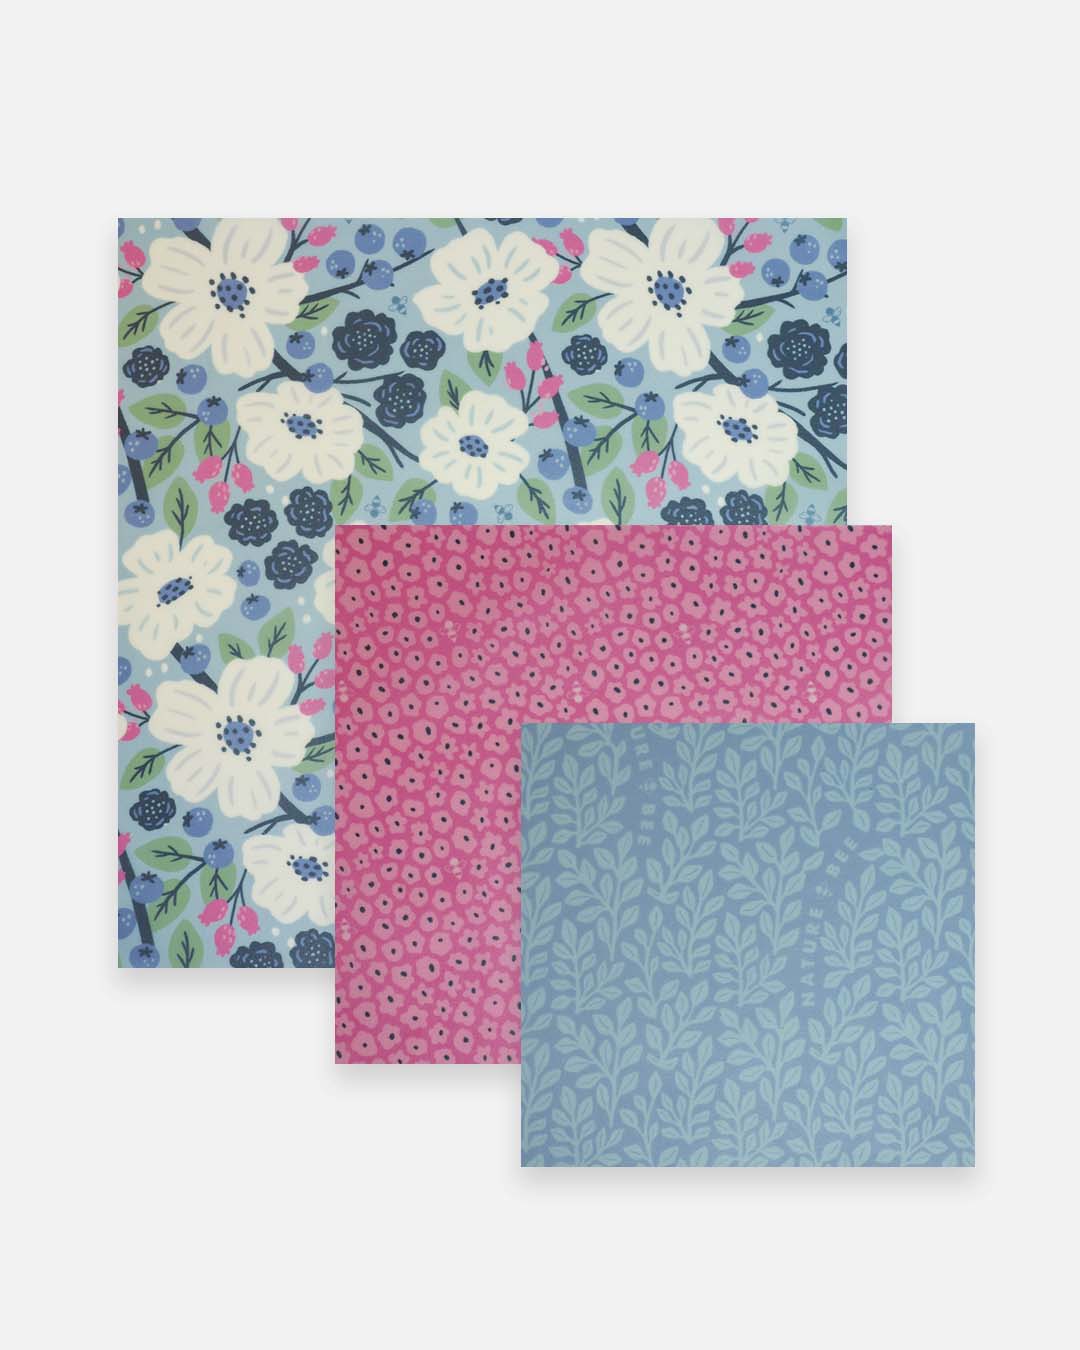 Three nature bee beeswax wraps, one floral patterned, the other pink and blue, on a white background